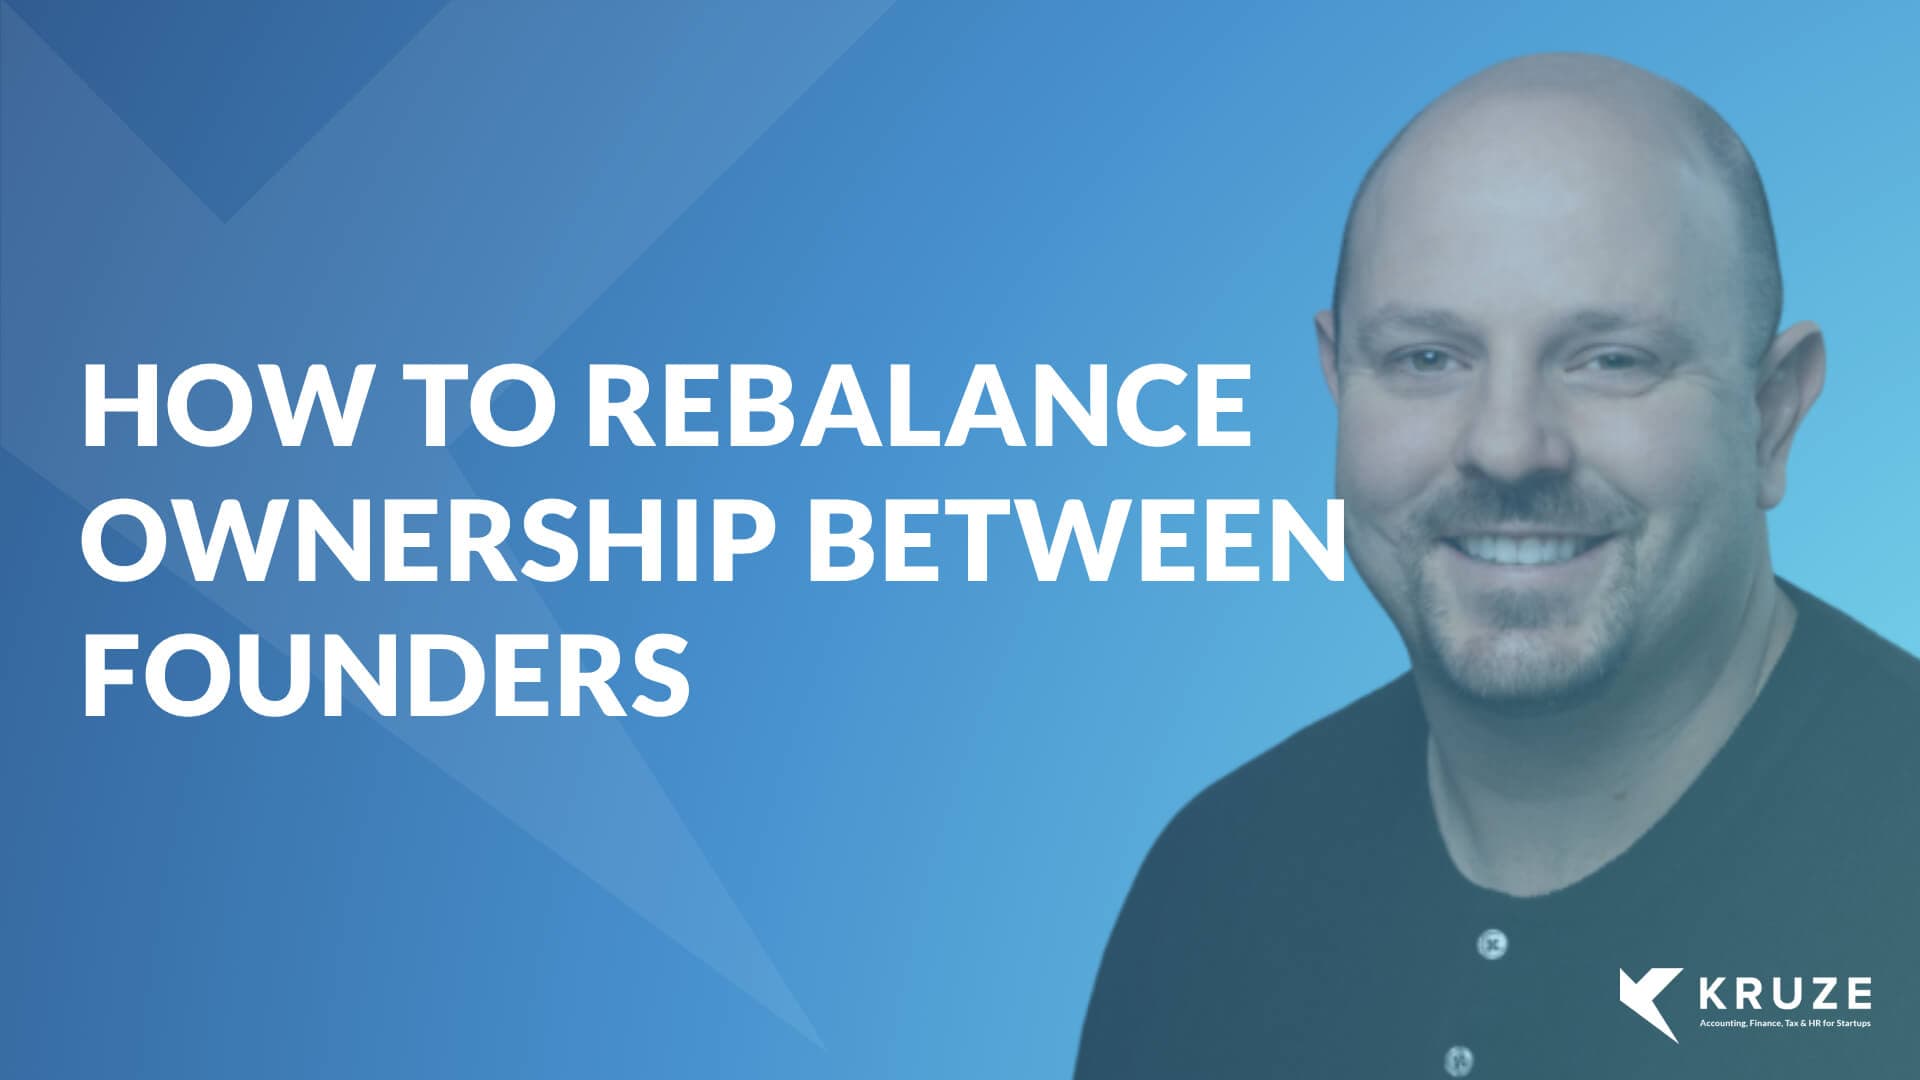 How to Rebalance Ownership Between Founders